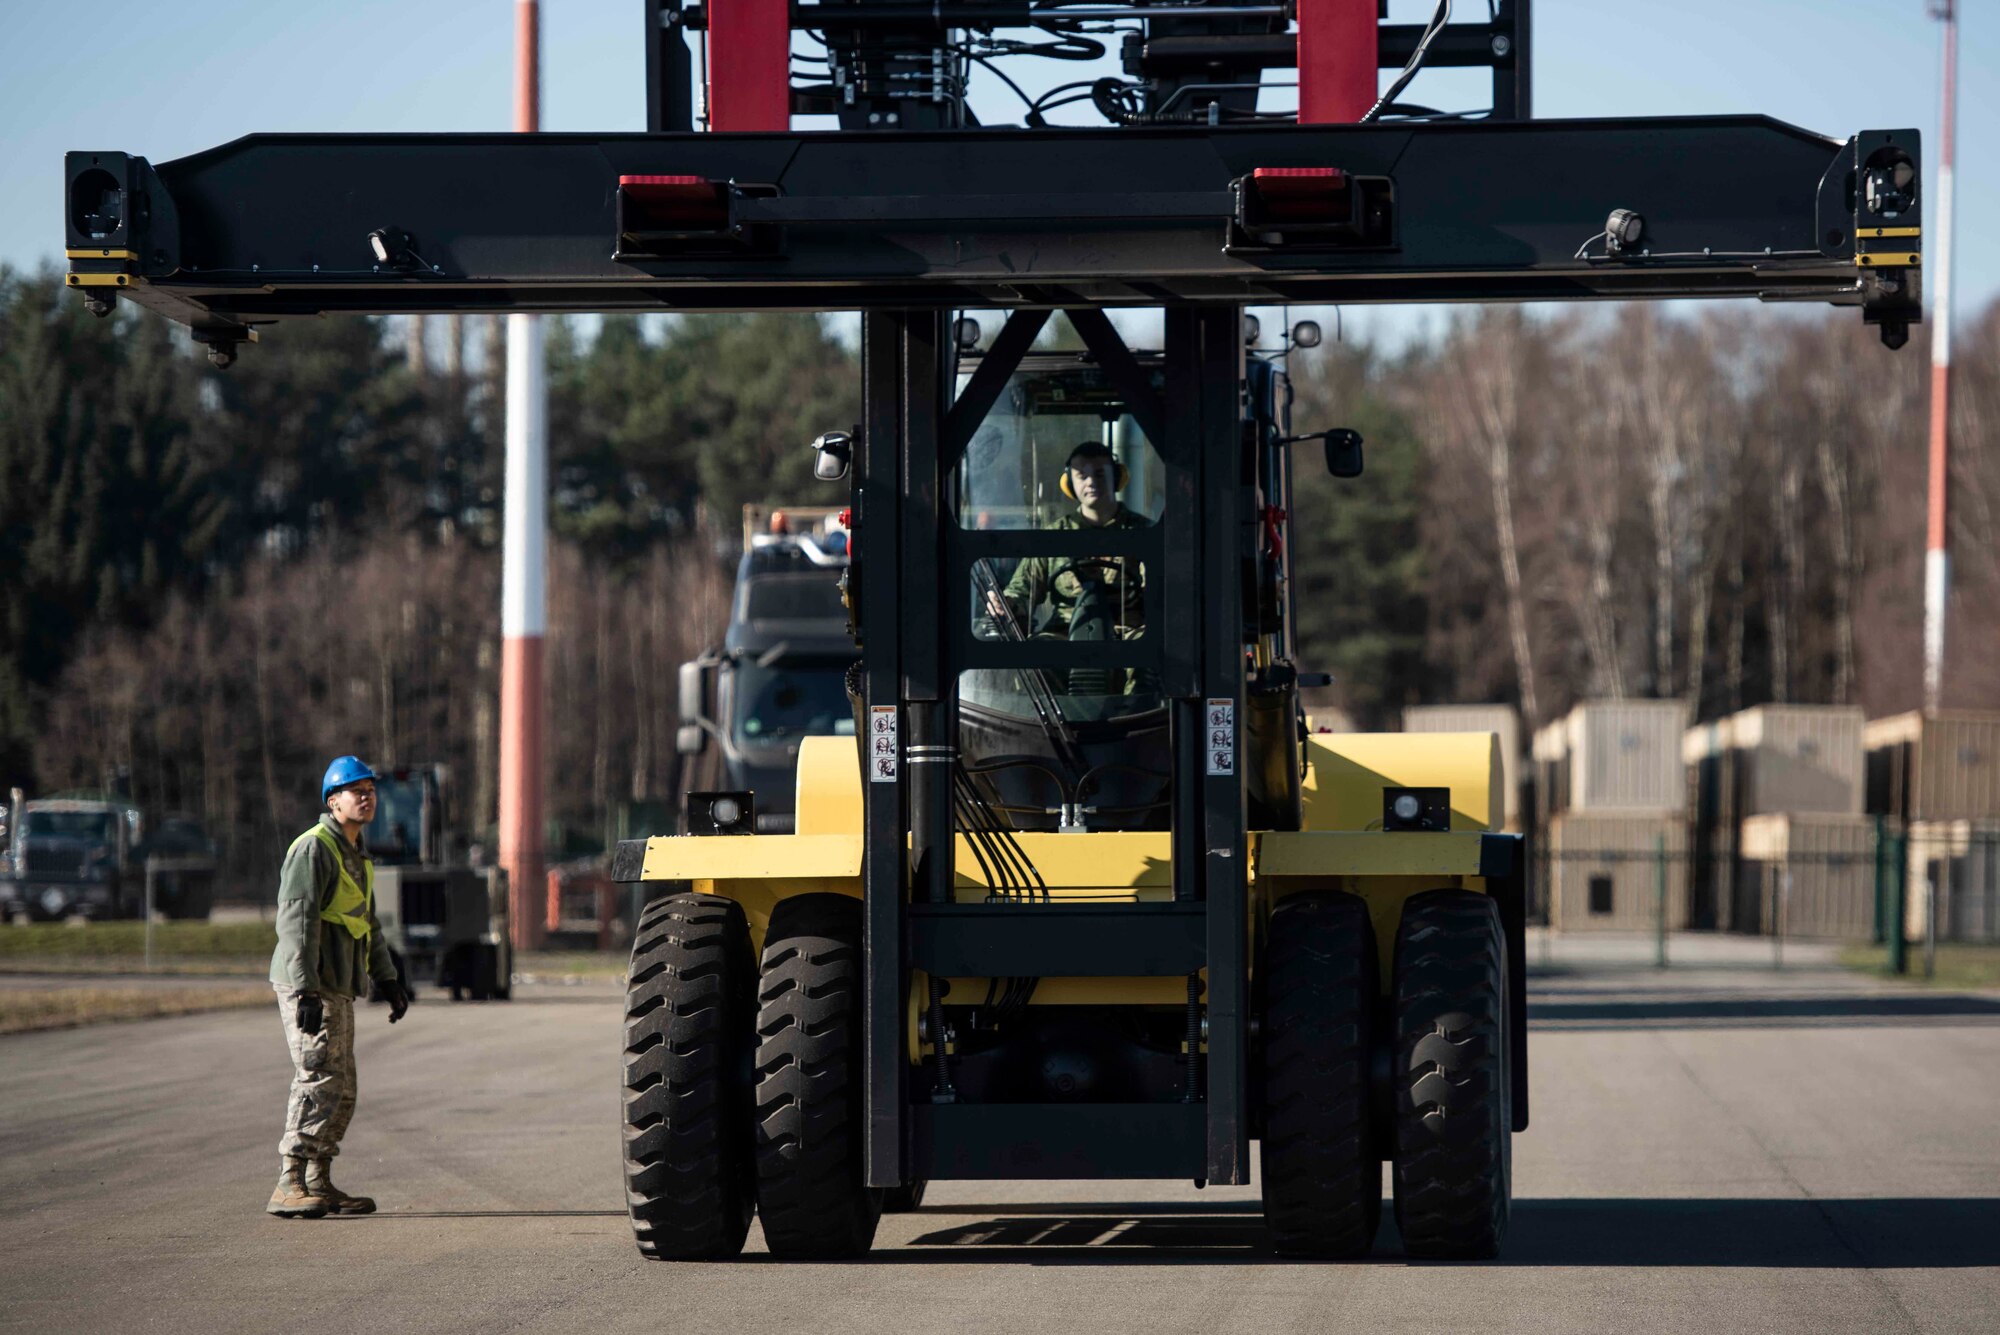 A U.S. Airman assigned to the 86th Munitions Squadron operates a “super stacker” forklift while transporting munitions at Ramstein Air Base, Germany, Feb. 6, 2020. The super stacker forklift allows Airmen to unload crates of munitions from semi-trucks safely and efficiently. (U.S. Air Force photo by Staff Sgt. Devin Nothstine)